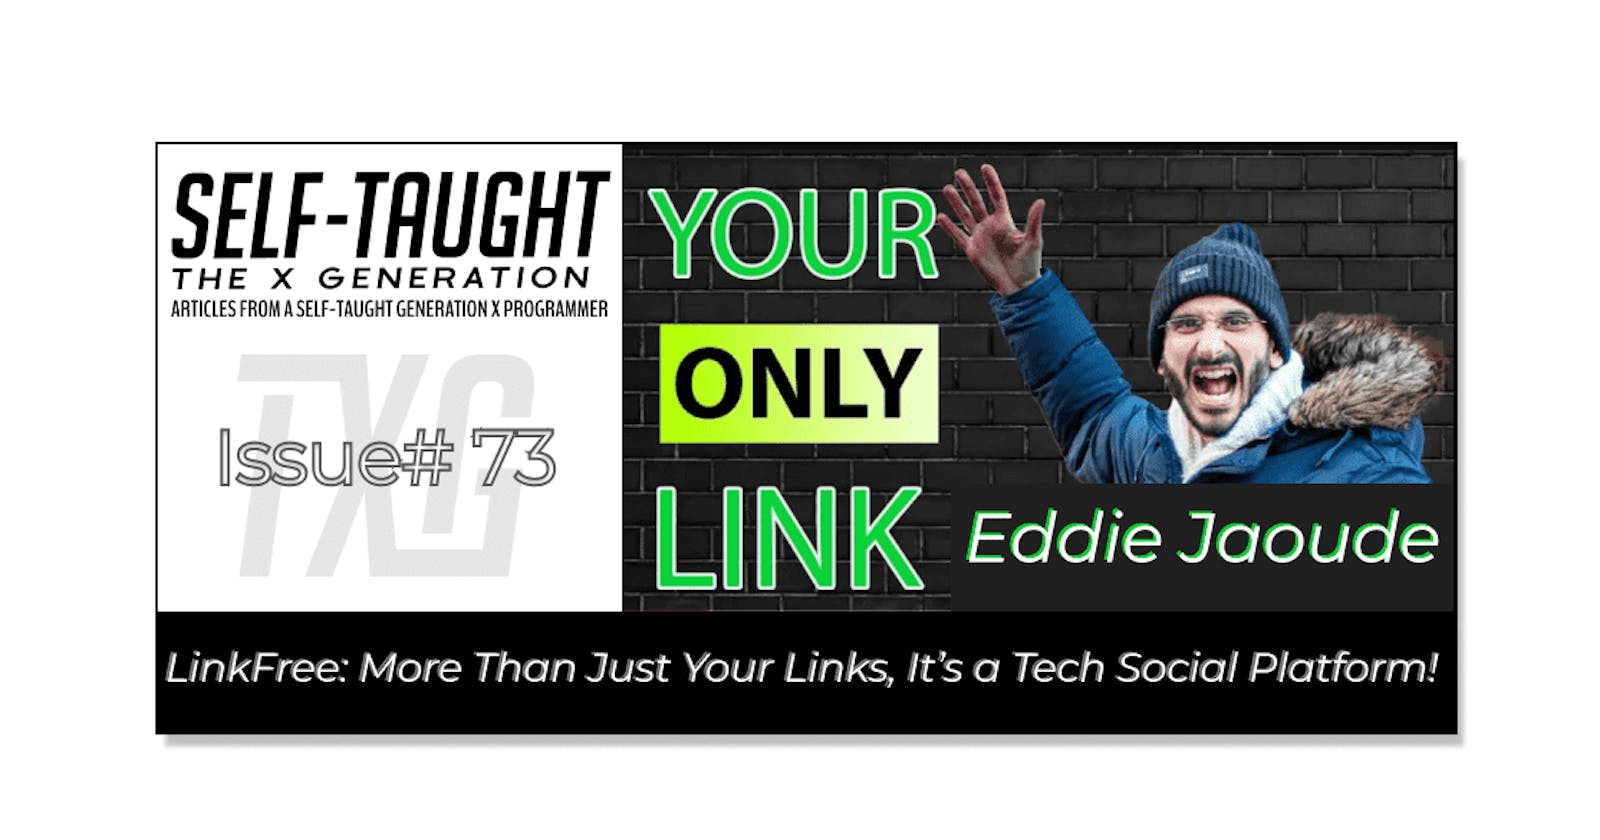 LinkFree: More Than Just Your Links, It’s a Tech Social Platform